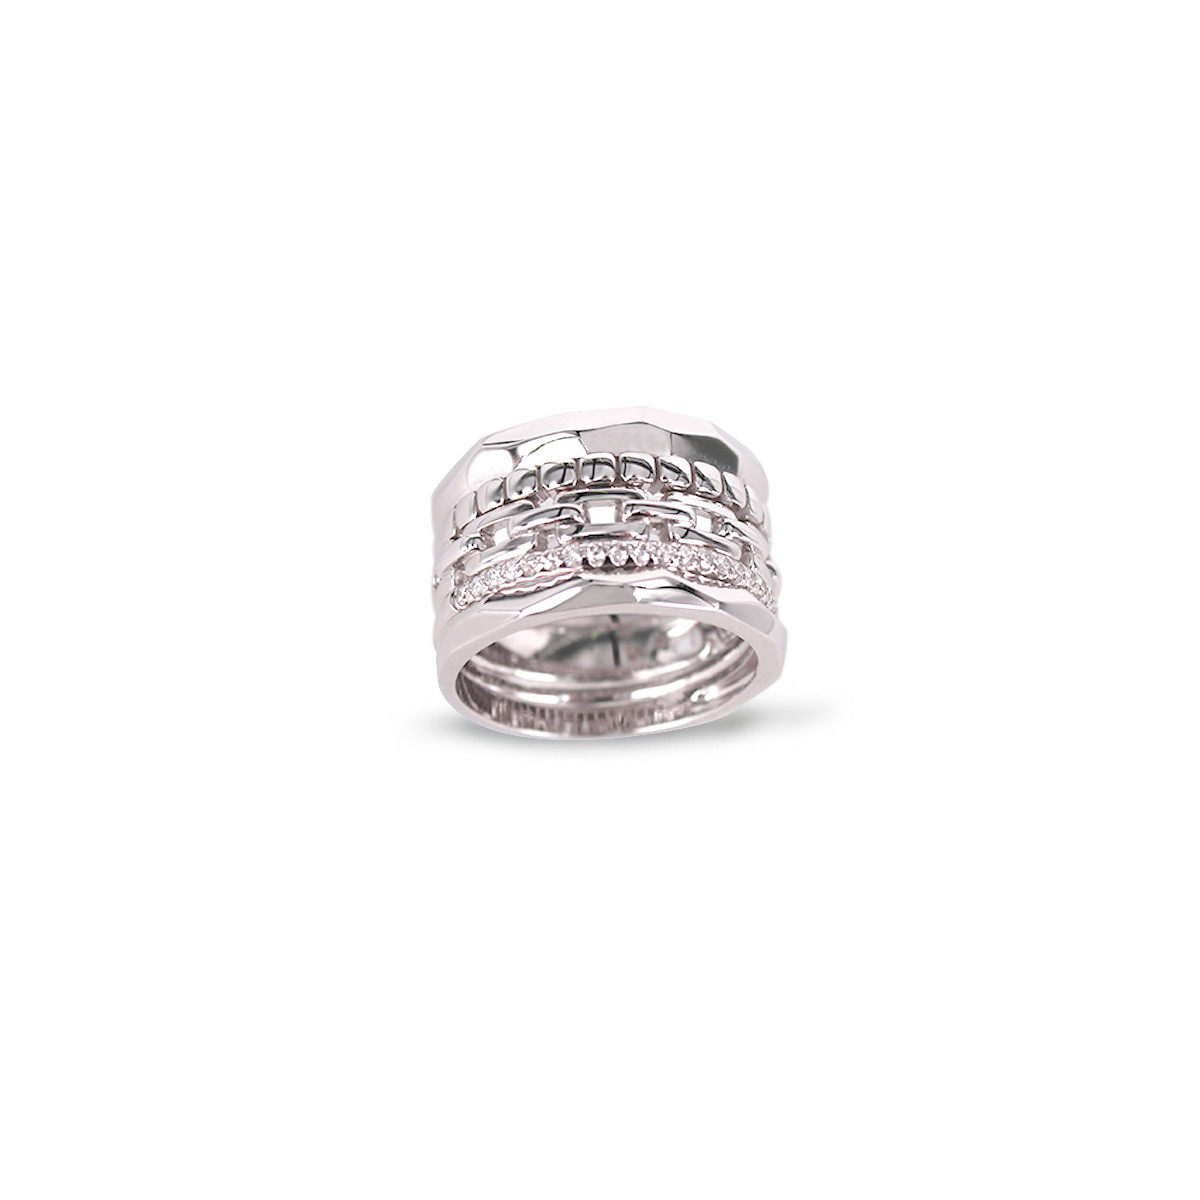 WHITE GOLD RING WITH DIAMONDS